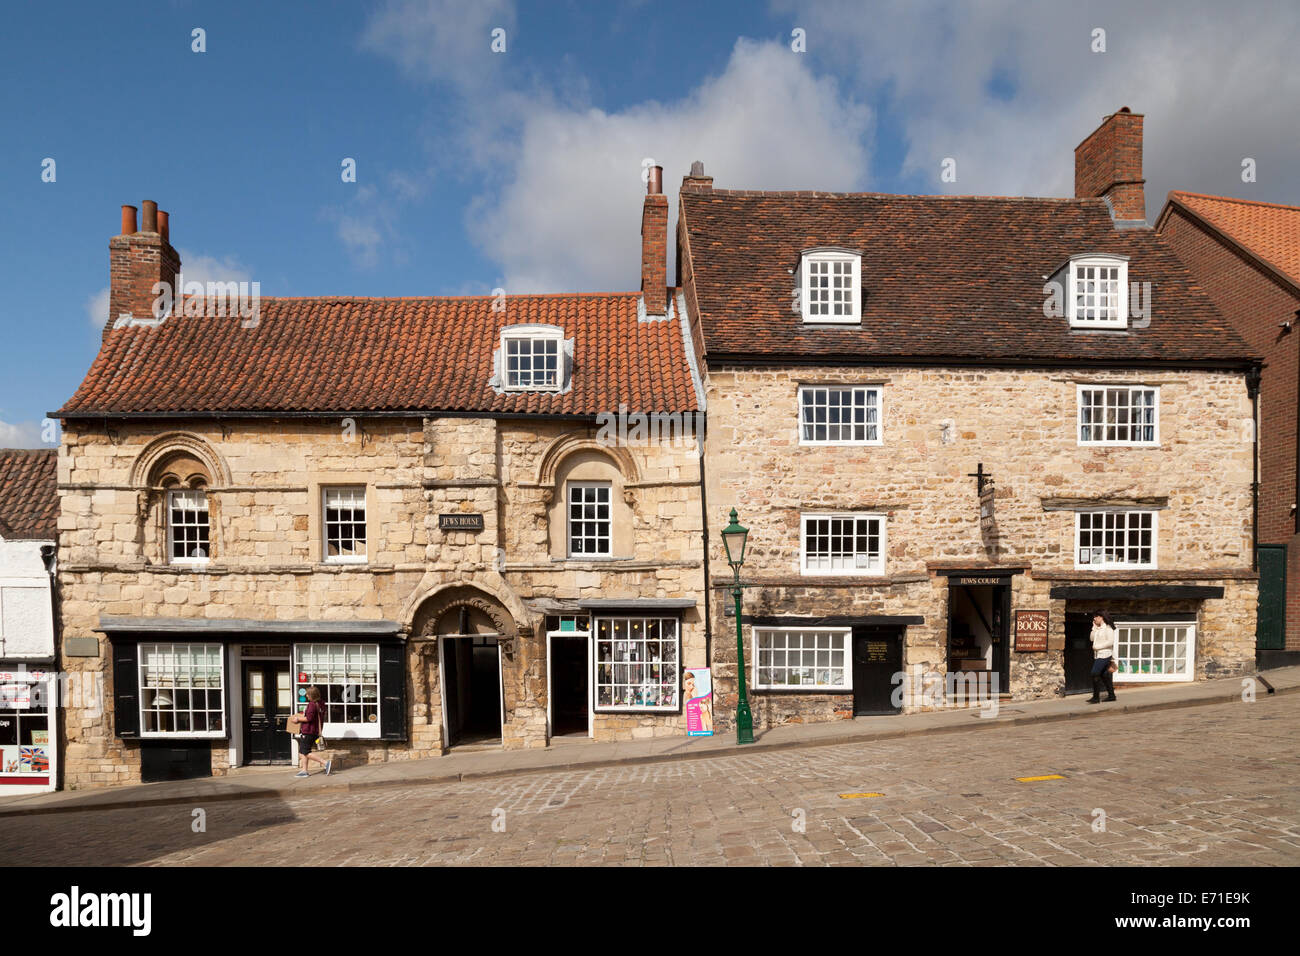 Jews House (on the left), and Jews Court, two of the oldest houses in England dating from 12th century, Steep Hill, Lincoln, UK Stock Photo